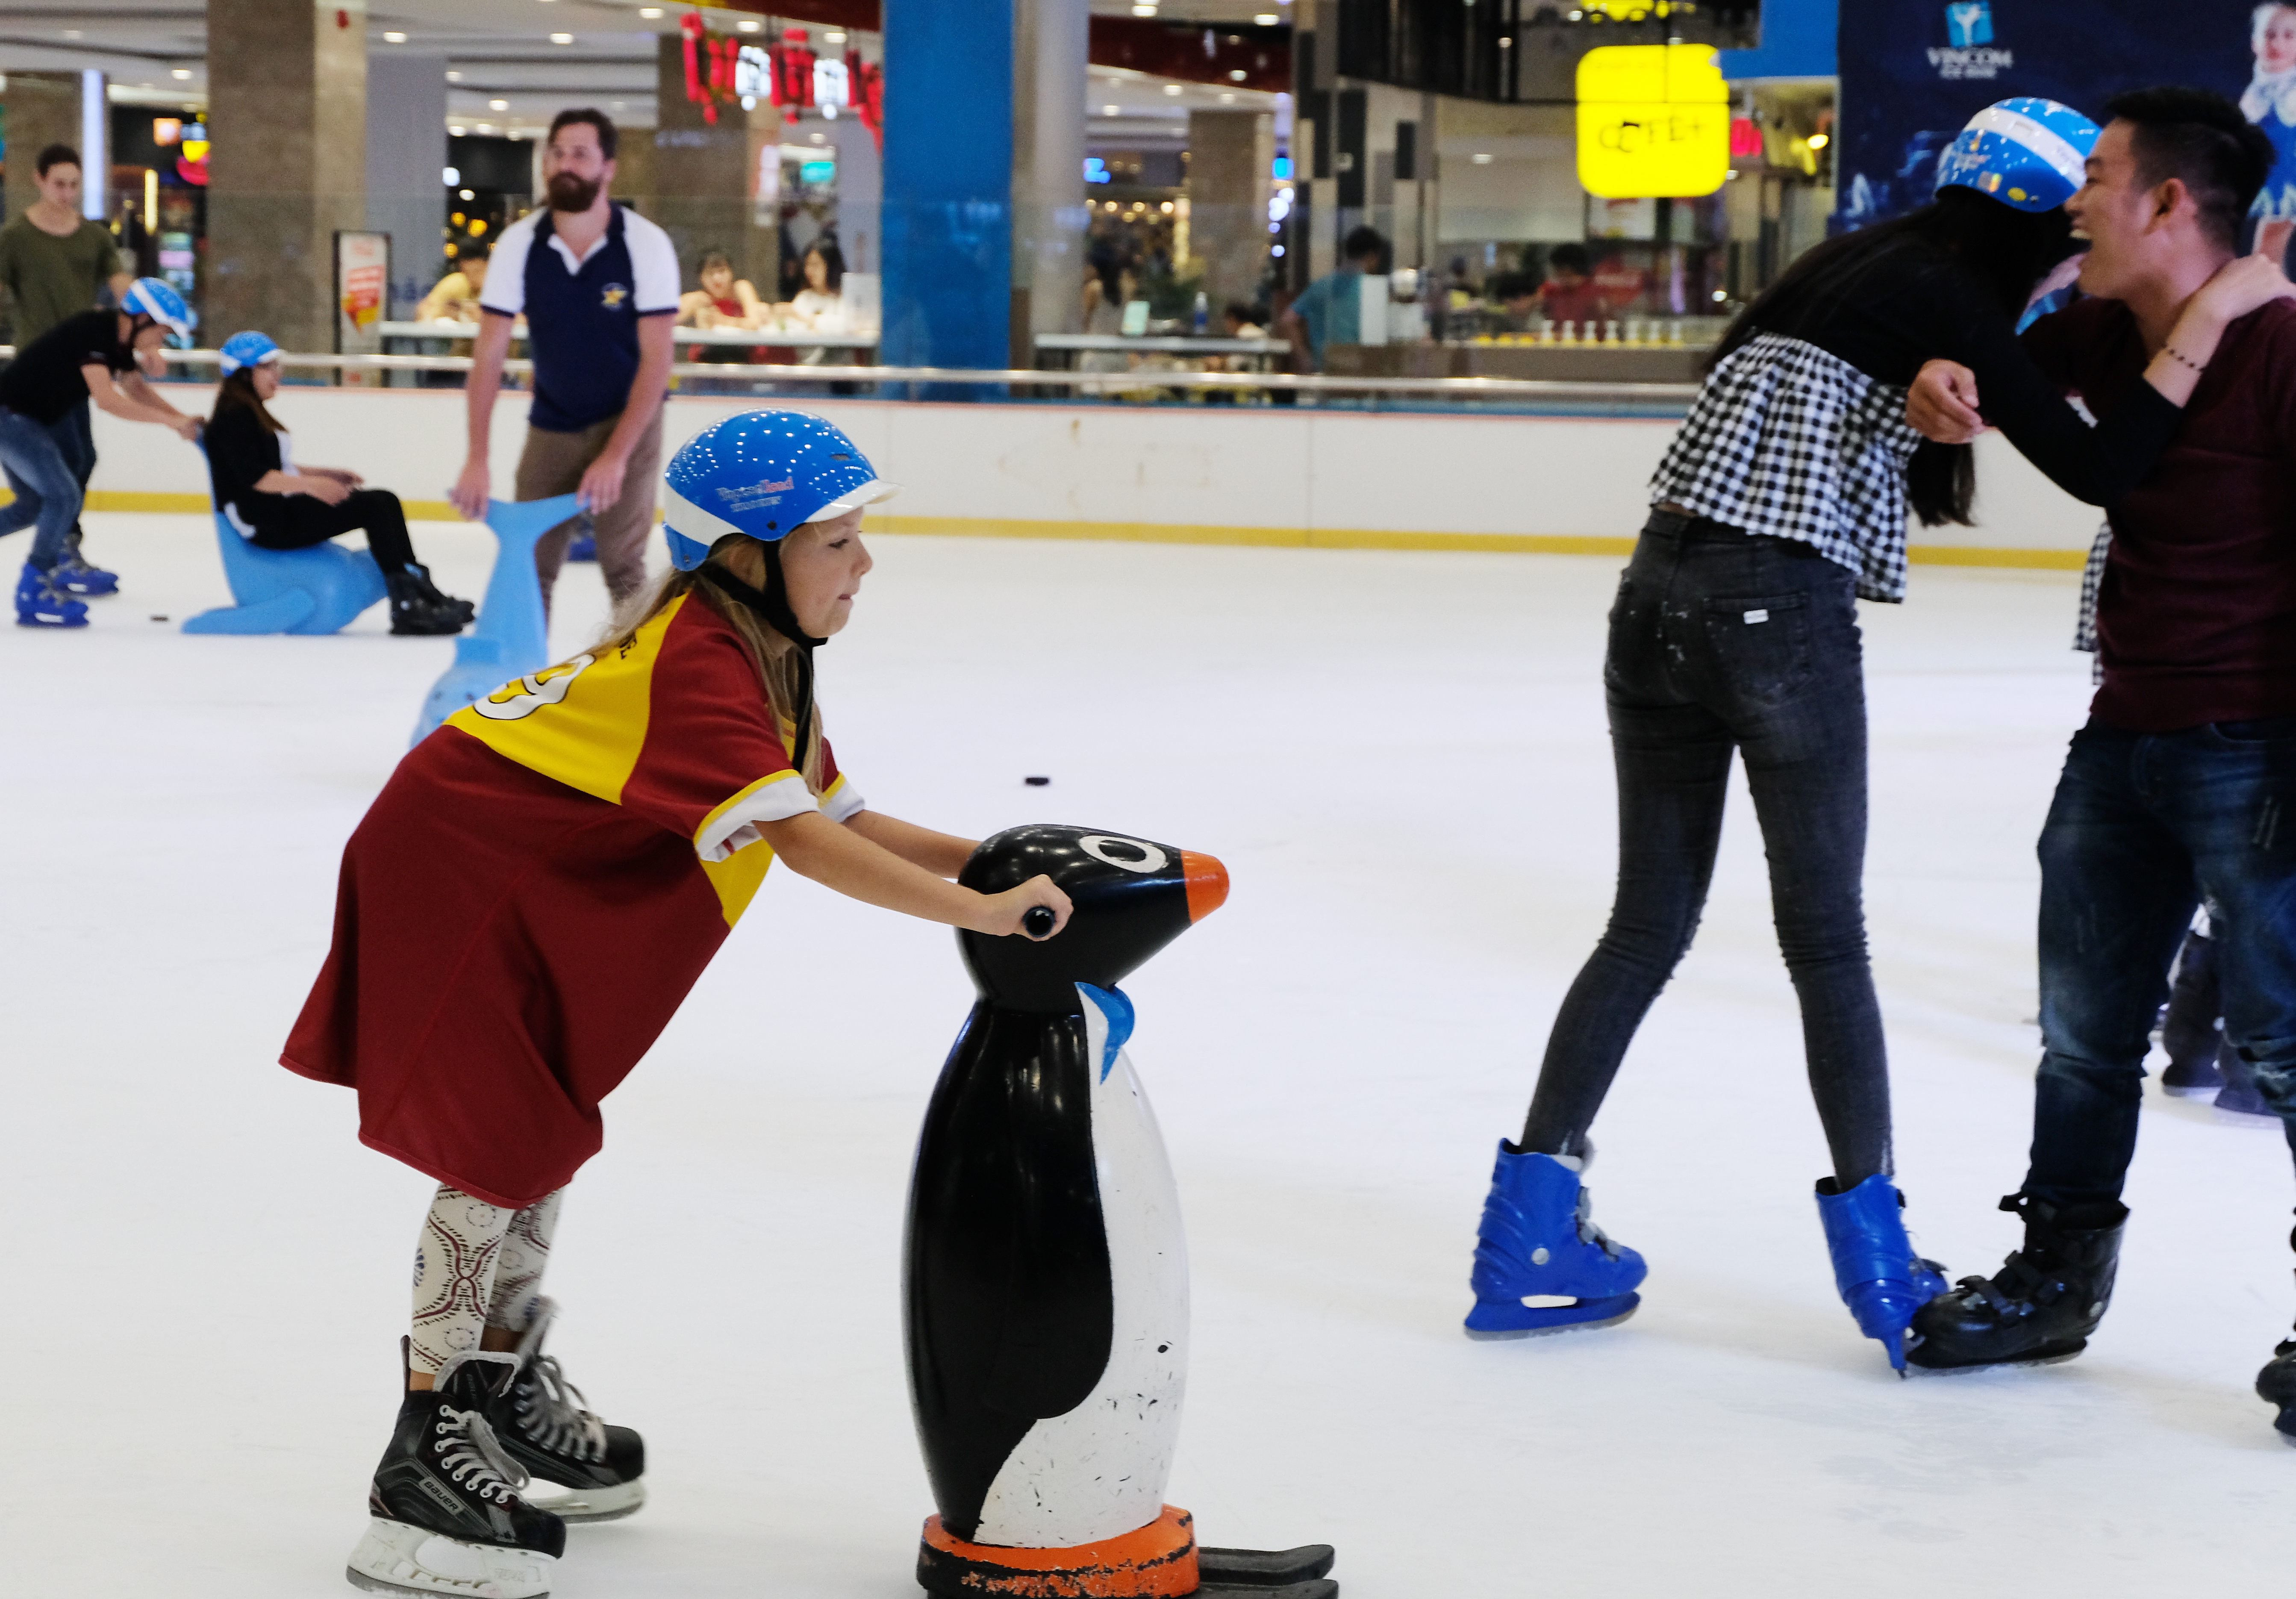 A young ice skater try to balance on ice - Photo: Tran Phuong/ Tuoi Tre News